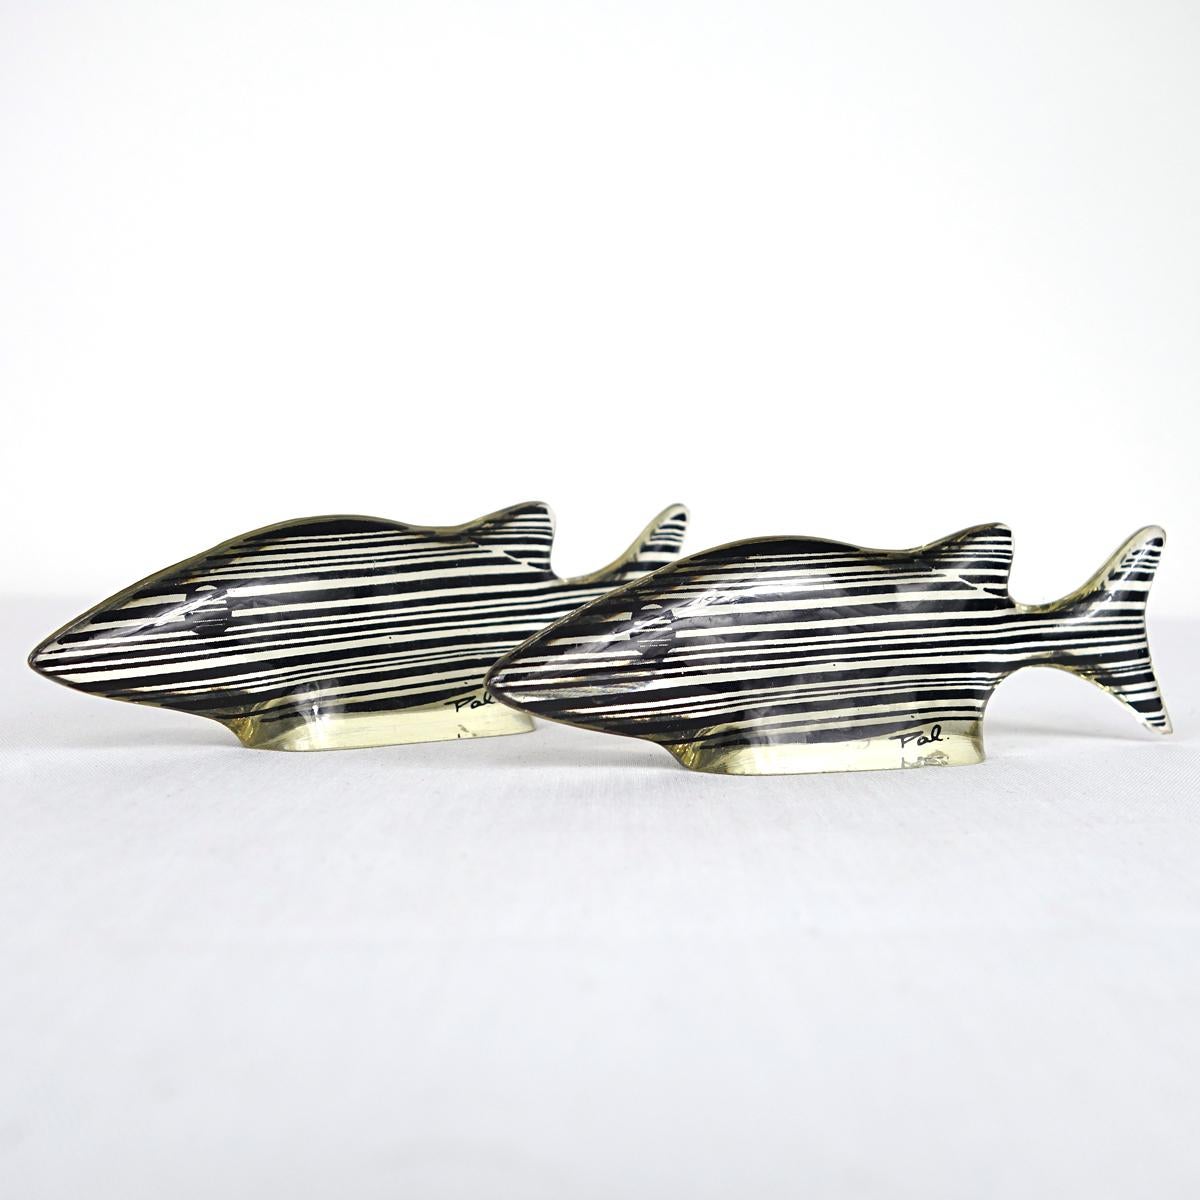 Pair of small black and white fish designed and made by Abraham Palatnik. 

The Brazilian artist Abraham Palatnik (1928 - 2020) was the founder of the technological movement in Brazilian art, and a Pioneer in making Kinetic sculptures.
In the